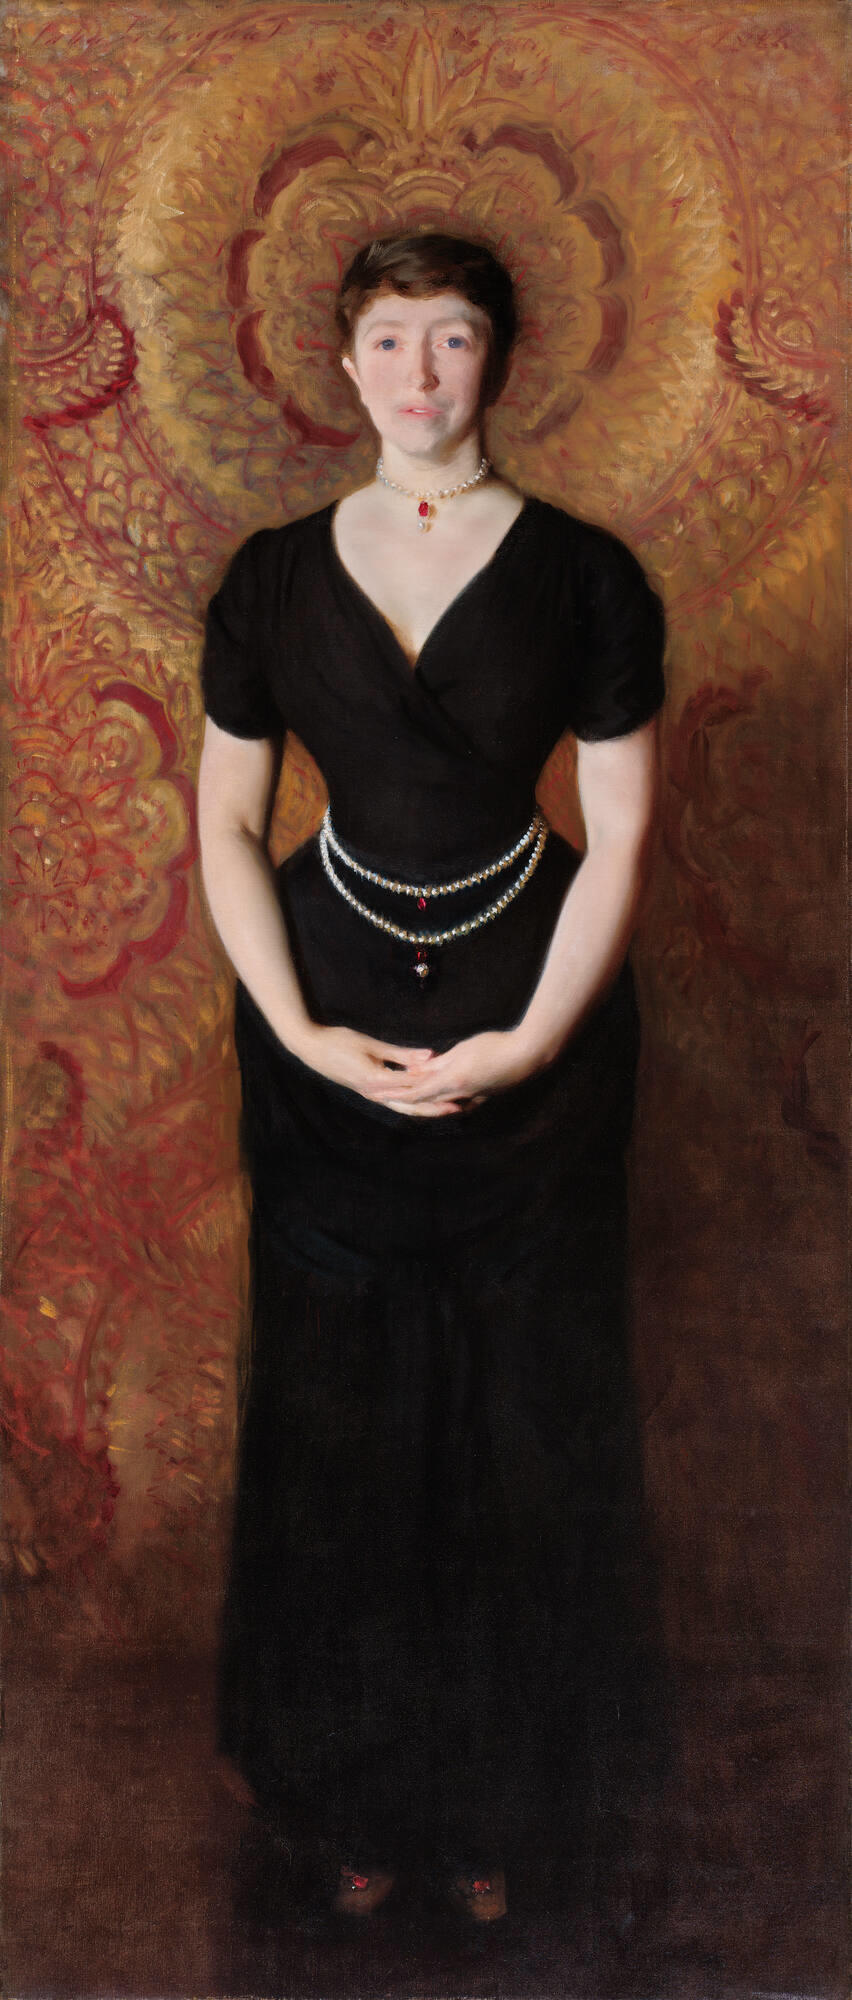 A woman, Isabella Stewart Gardner, with light skin, brown hair, and blue eyes stands with her hands clasped in front of her. She wears a black dress with pearls and rubies around her neck and waist.